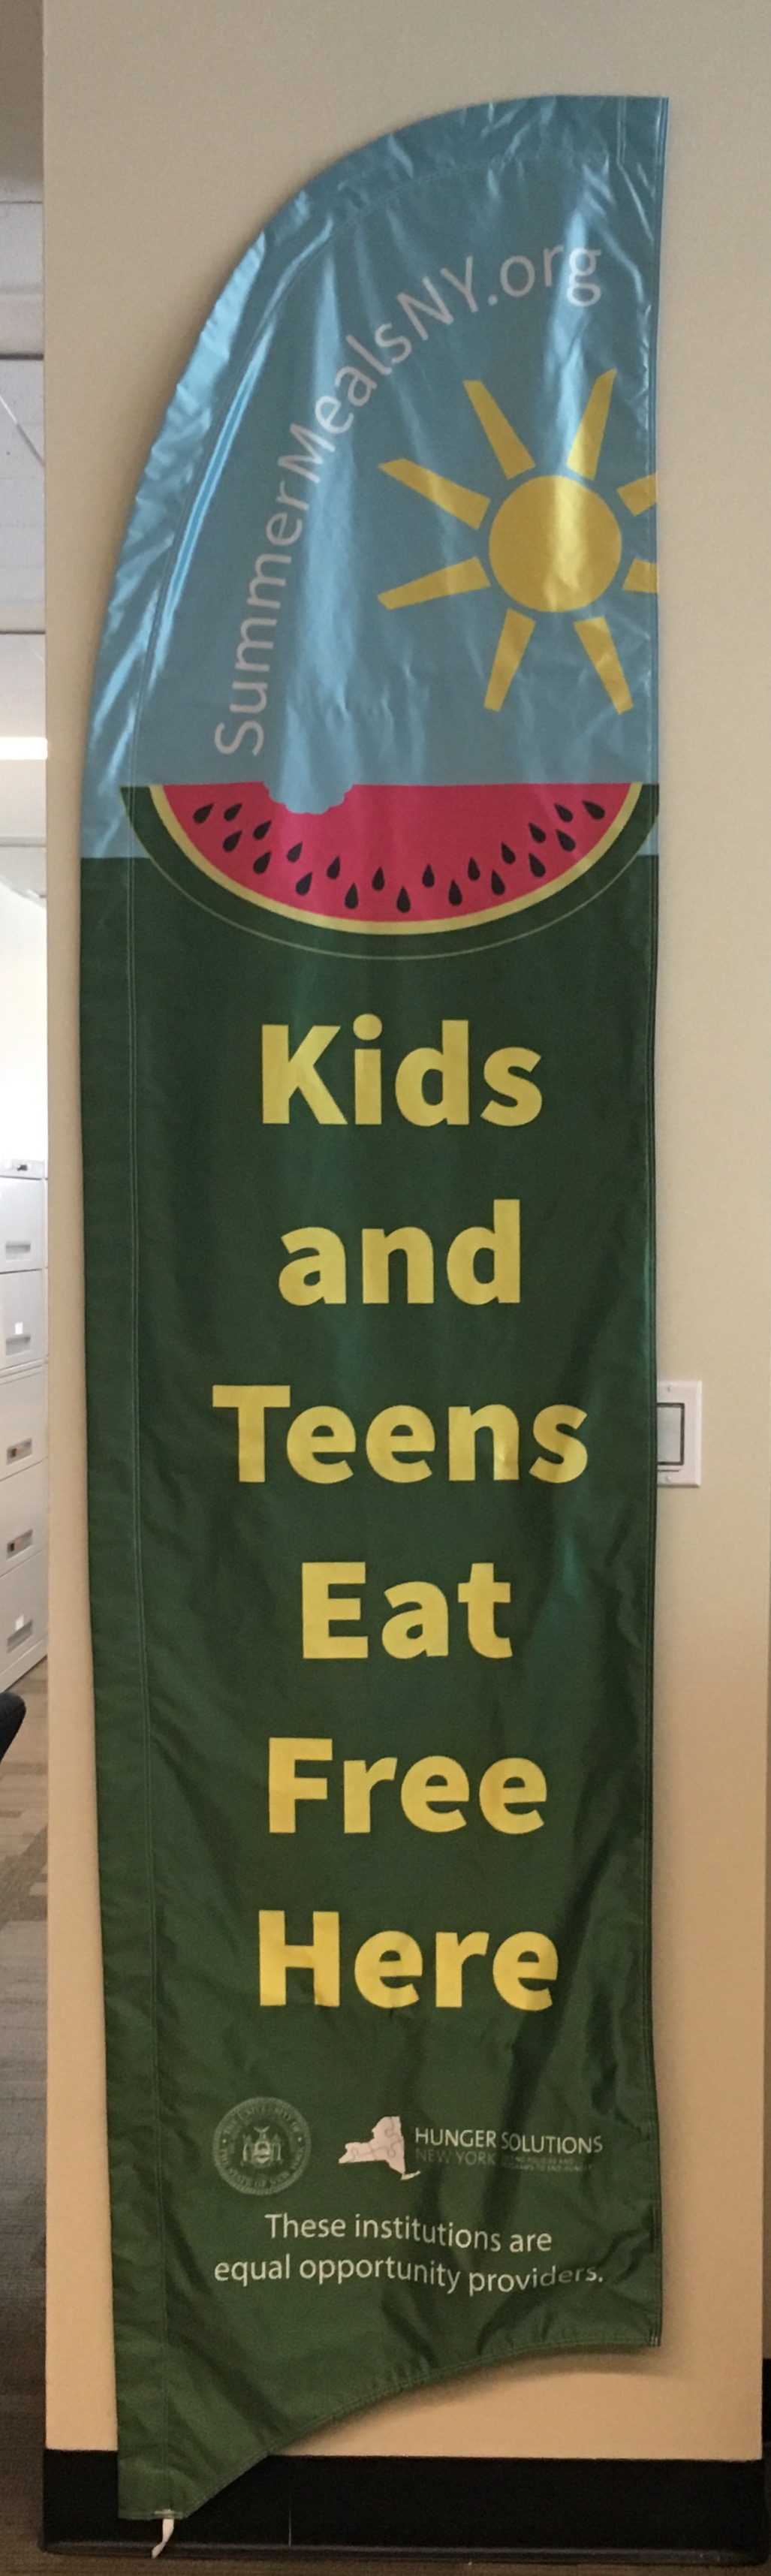 Razor Banner For SFSP English and Spanish - "Kids and Teens Eat Free Here"